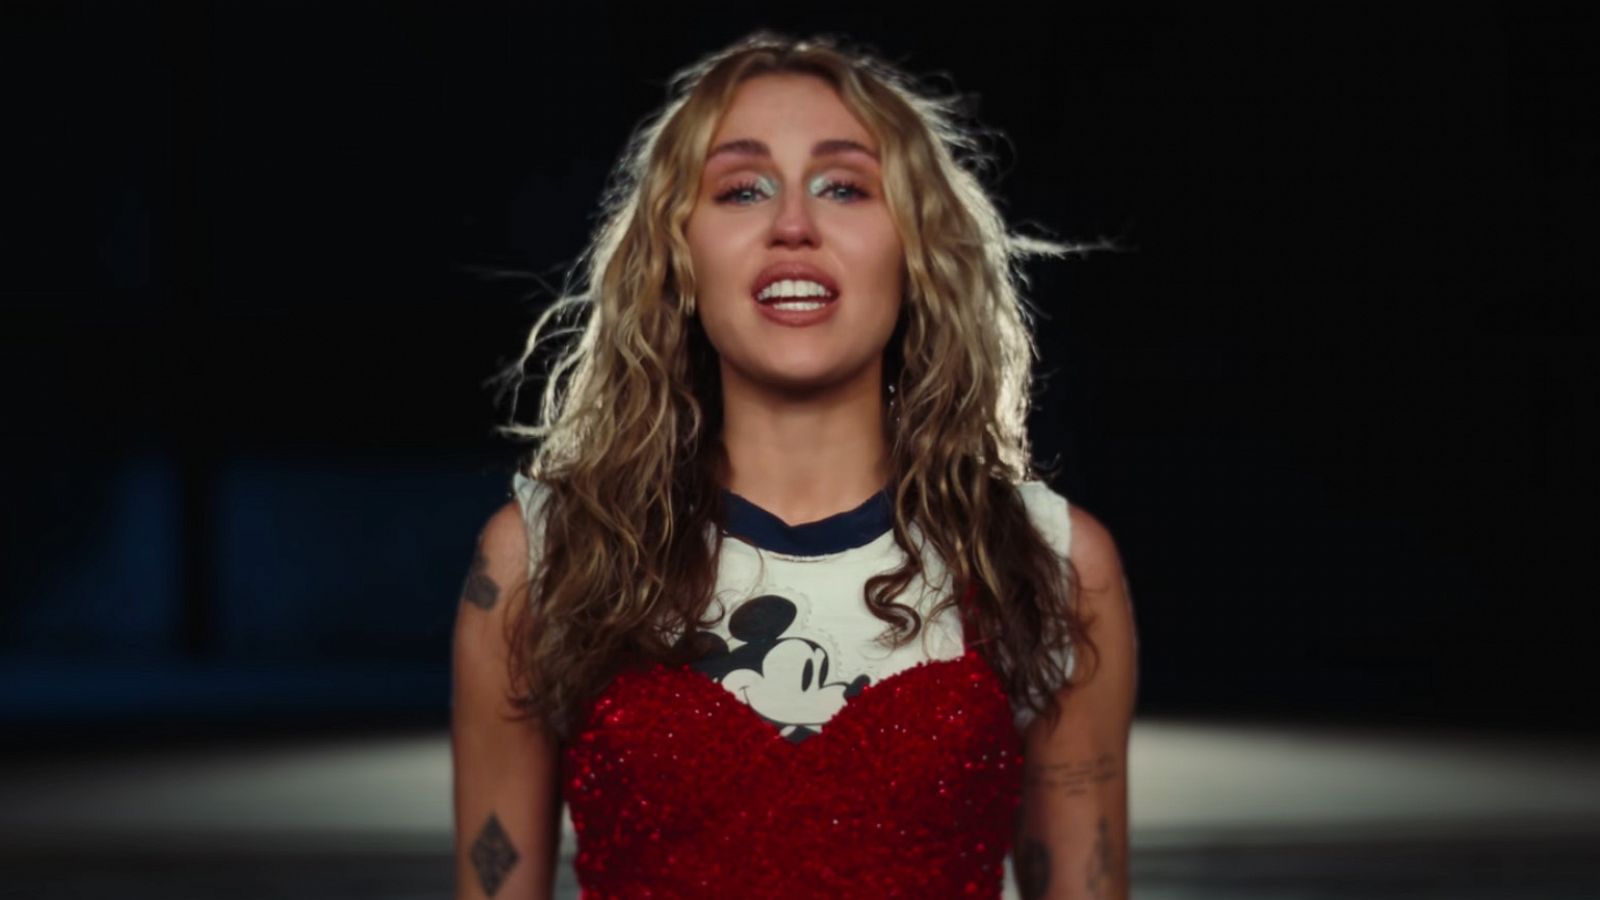 PHOTO: Miley Cyrus is seen in a still from her new music video, "Used To Be Young."